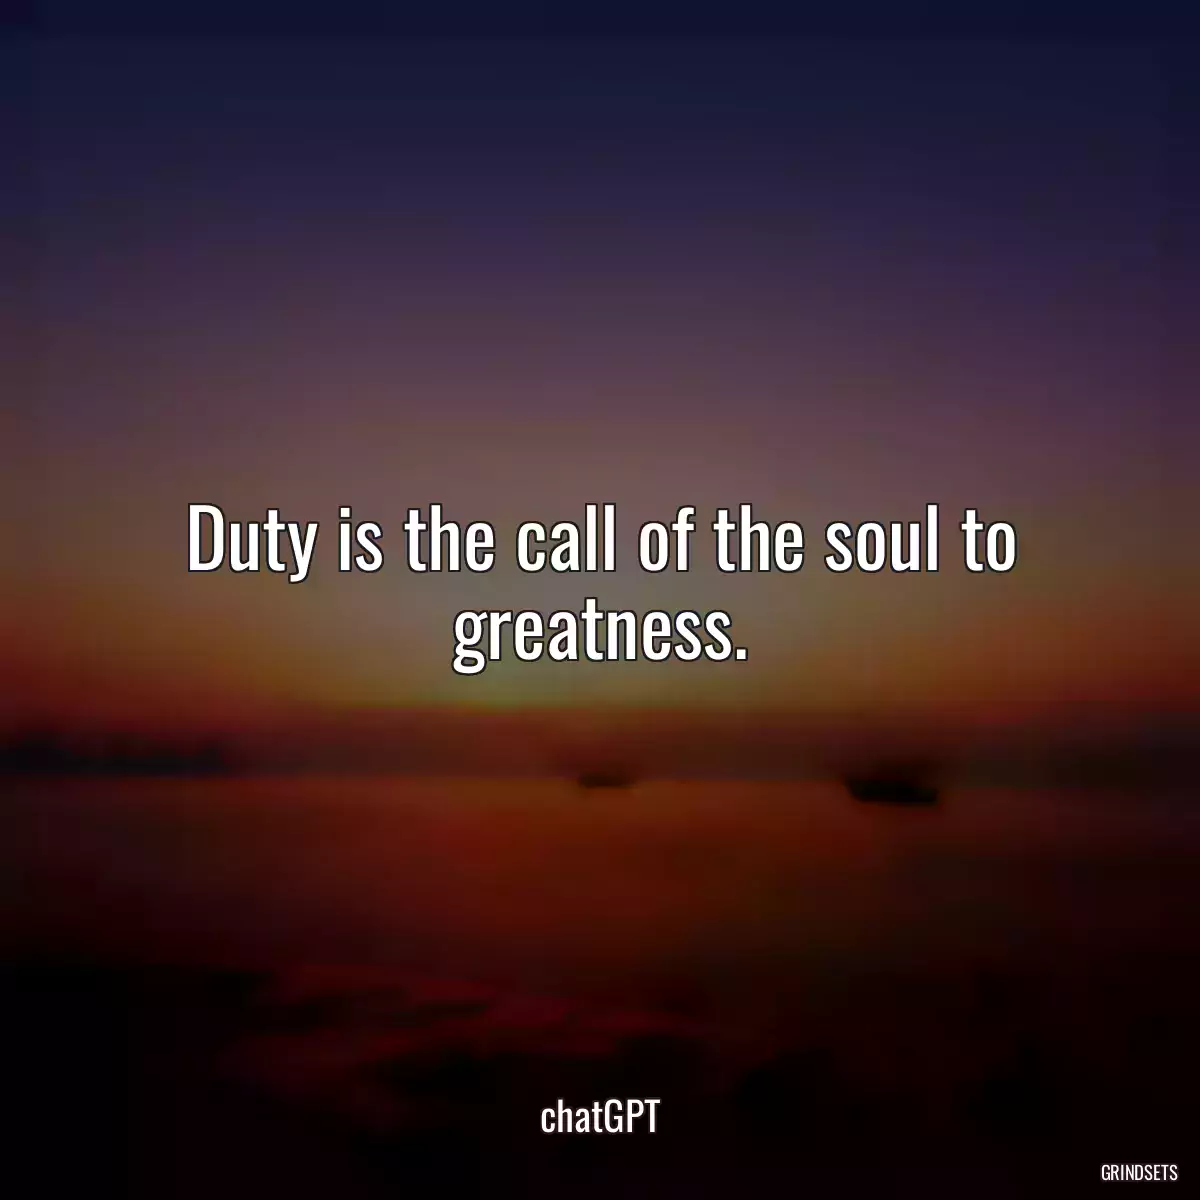 Duty is the call of the soul to greatness.